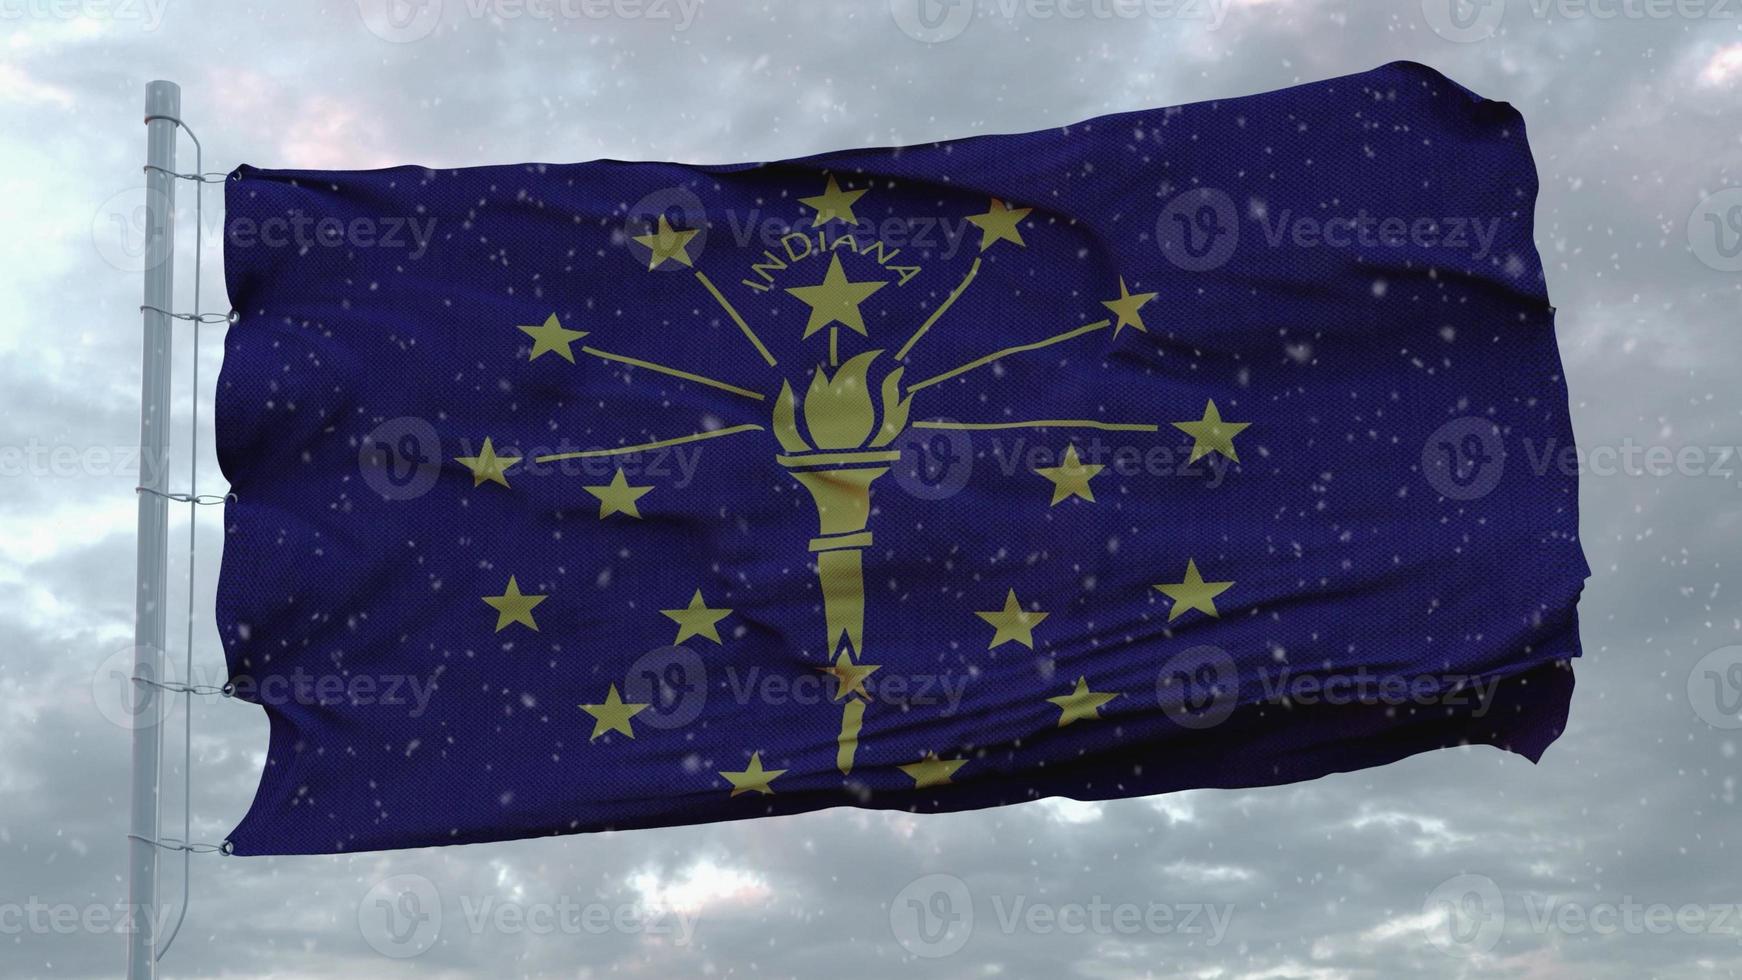 Indiana winter flag with snowflakes background. United States of America. 3d illustration photo